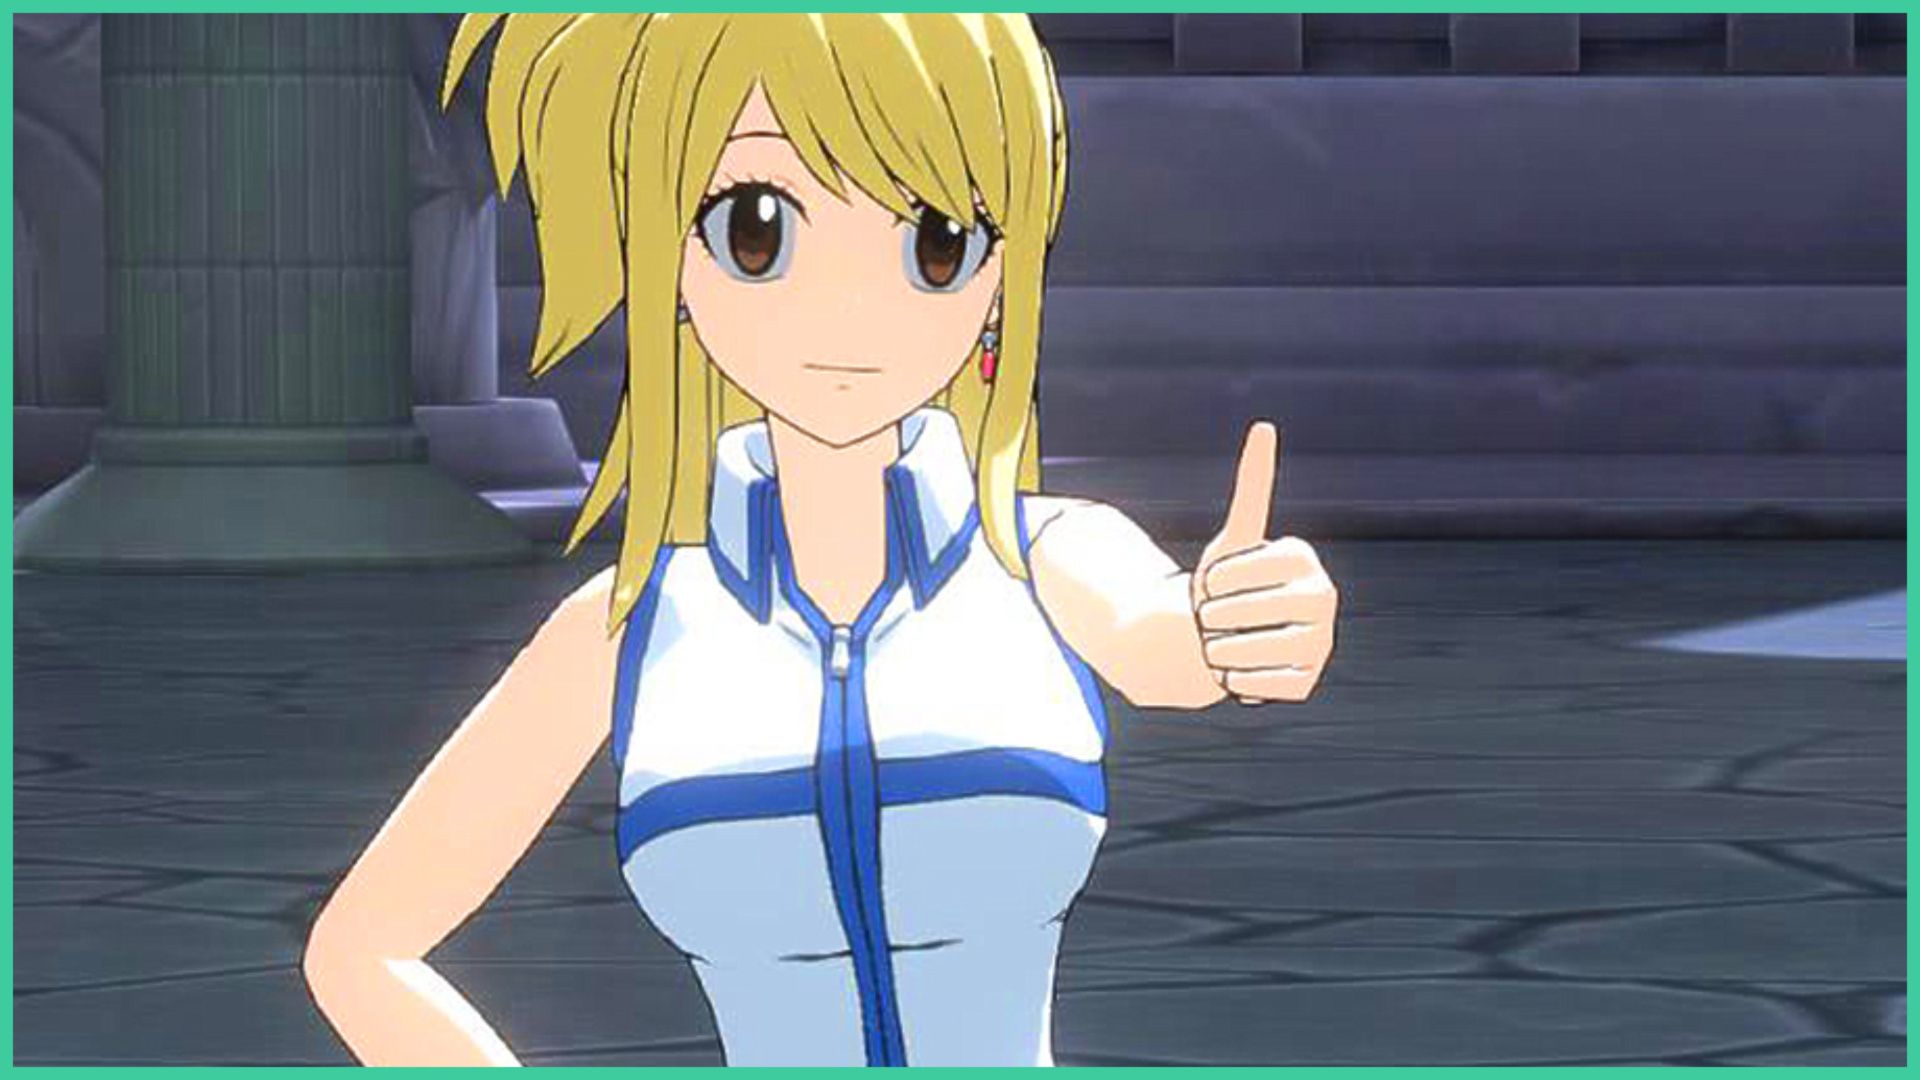 feature image for our fairy tail fierce fight codes guide, the image is a screenshot of a 3D lucy from the fairy tail series smiling as she puts one hand on her hip and the other is held out as she does a thumbs up pose